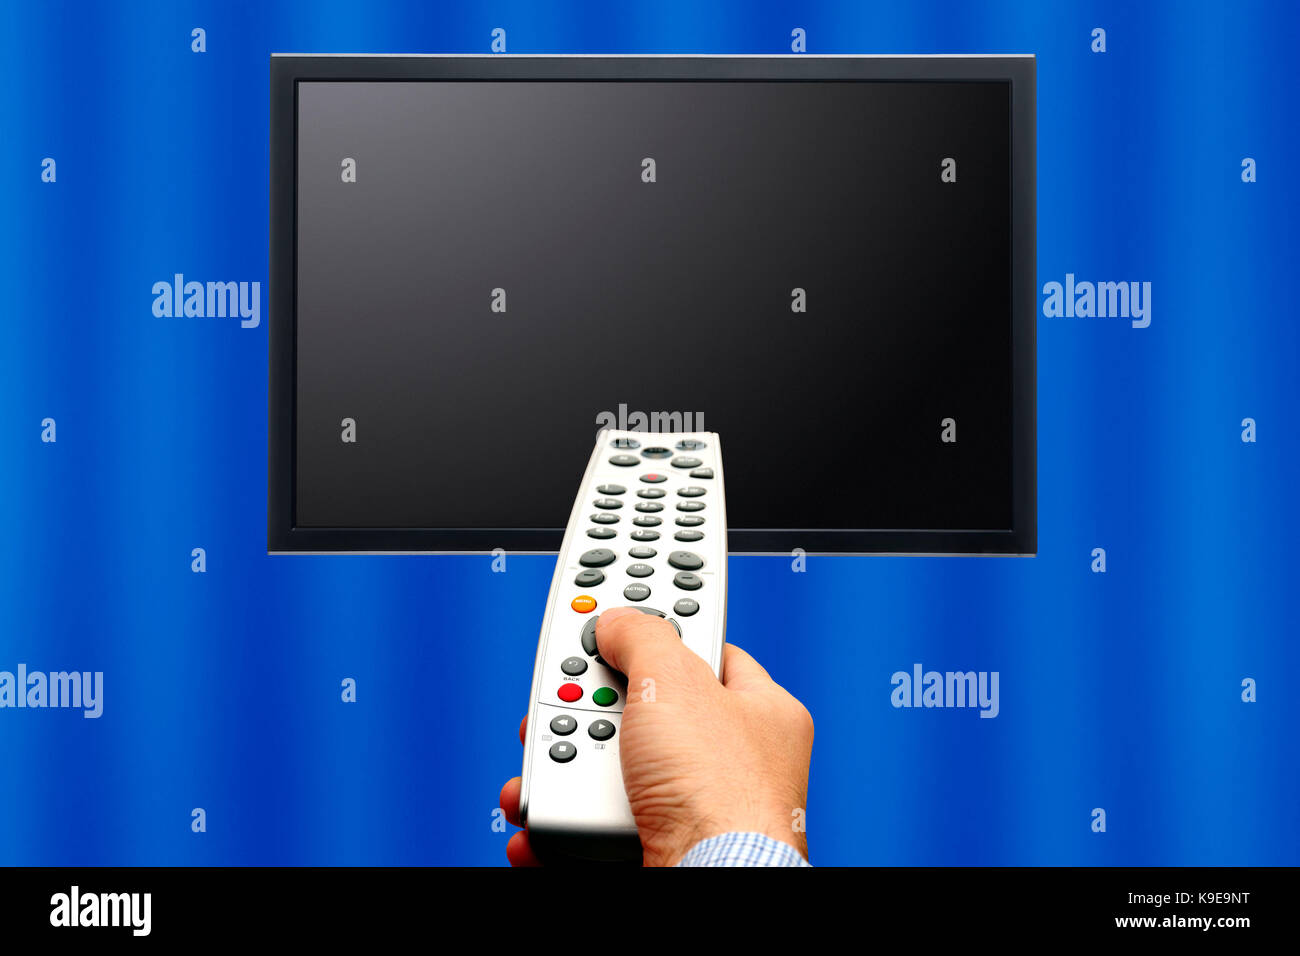 male hand holding a remote control pointed a tv screen Stock Photo